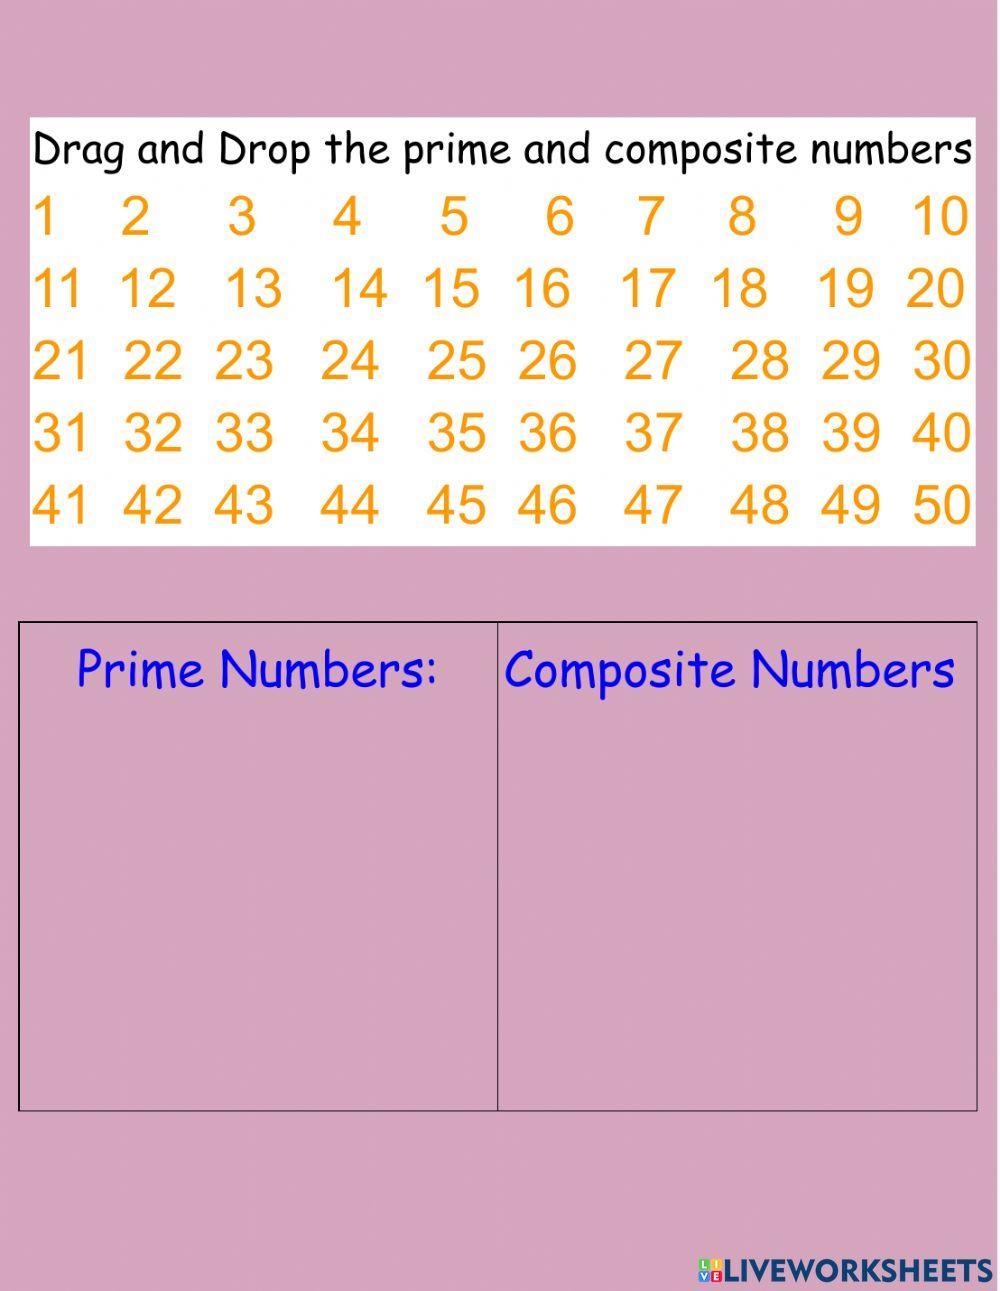 Prime and Composite Number